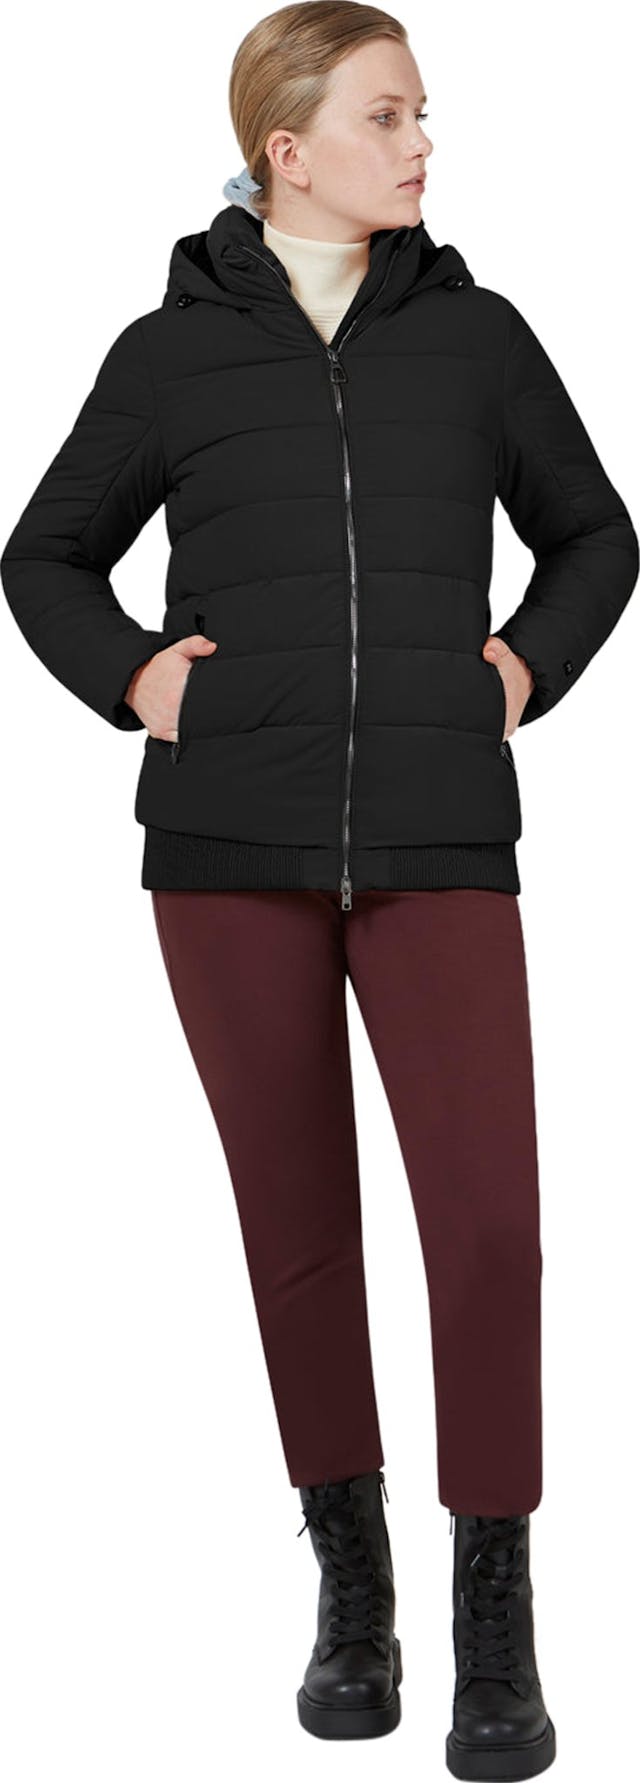 Product image for Alta Jacket - Women's